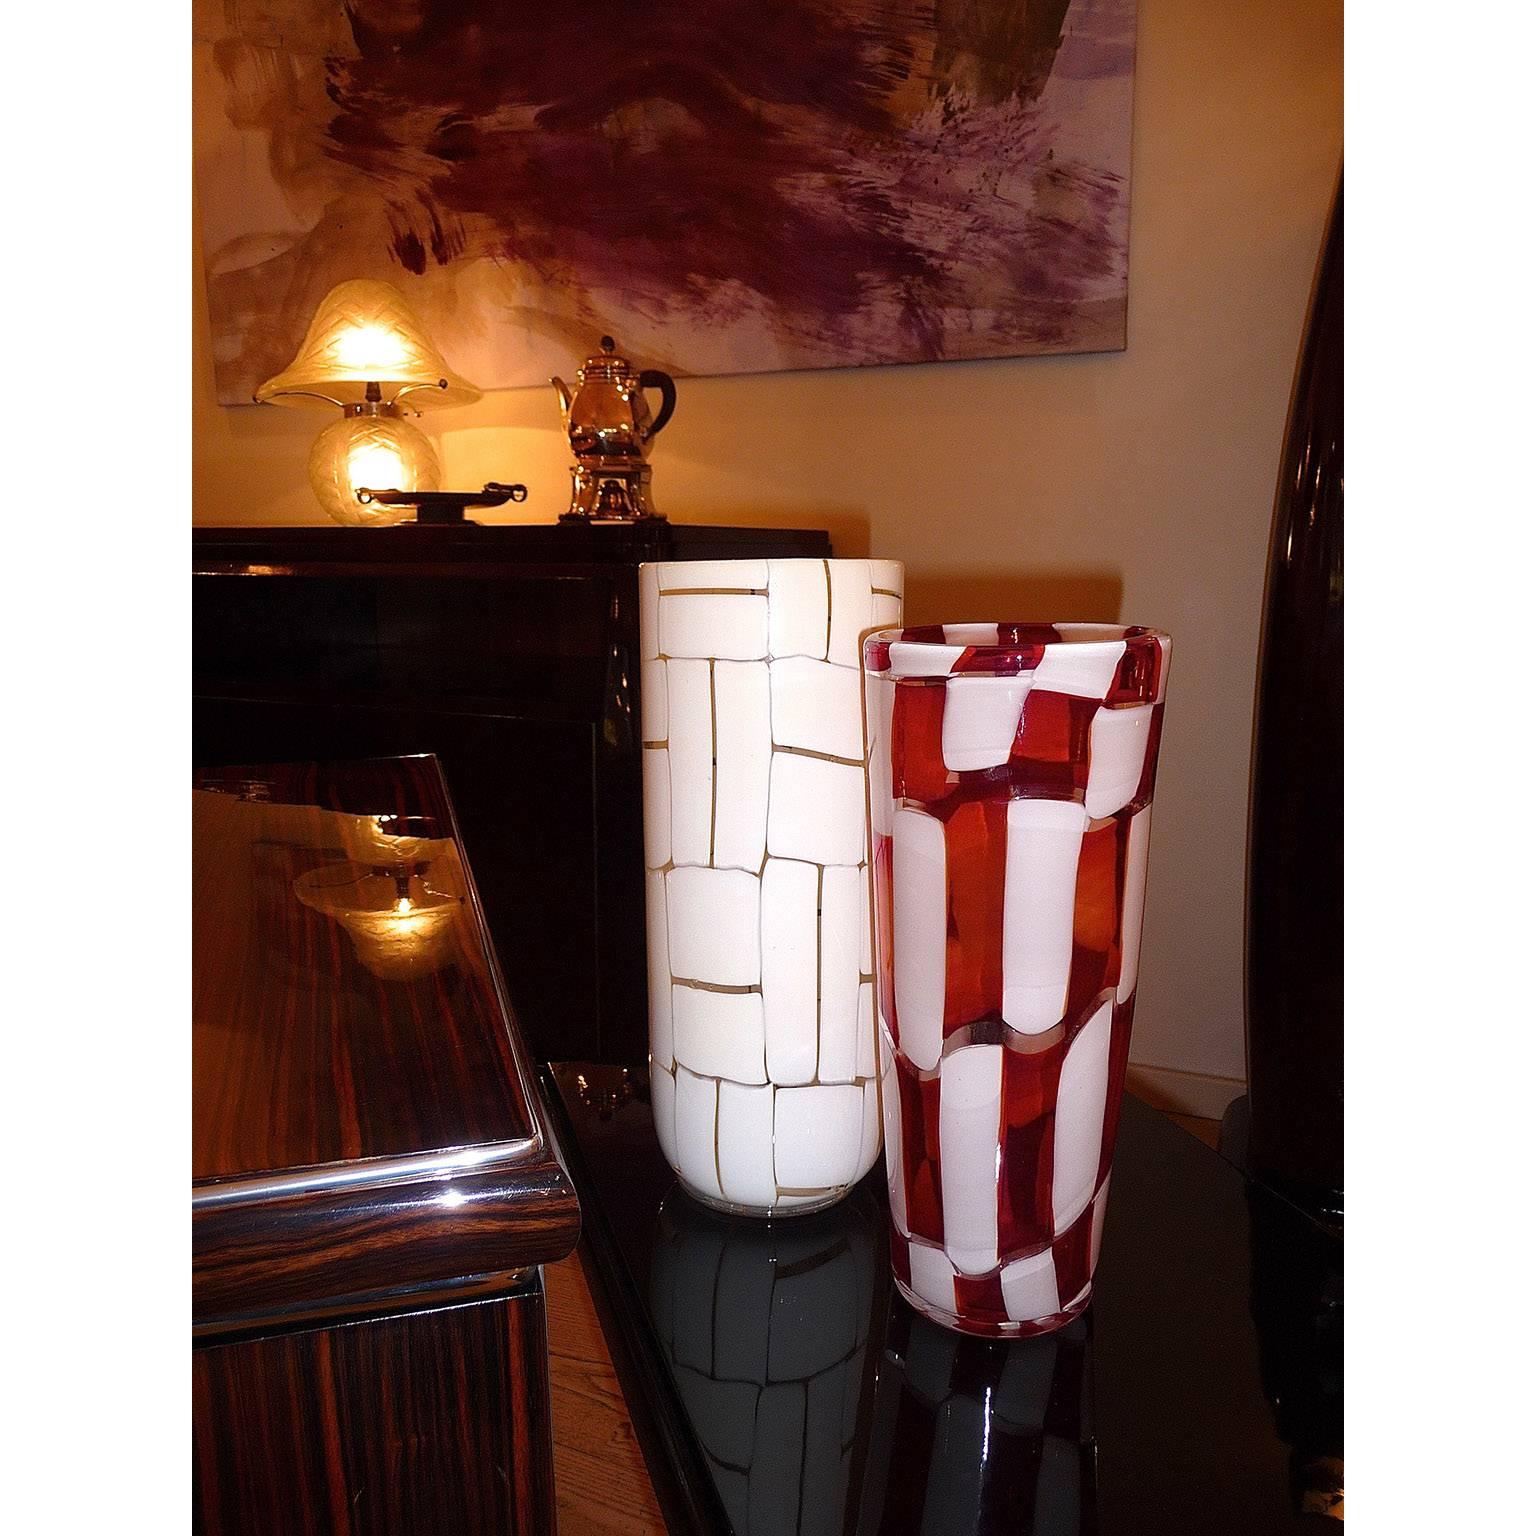 White Tessere vase, design by Ercole Barovier, circa 1956, execution Barovier & Toso, Murano.
Clear glass with alternating tessere fused in staggered pairs.

Dimensions: Height 34 cm (13-1/2 inches)
Condition: Very good condition

Similar